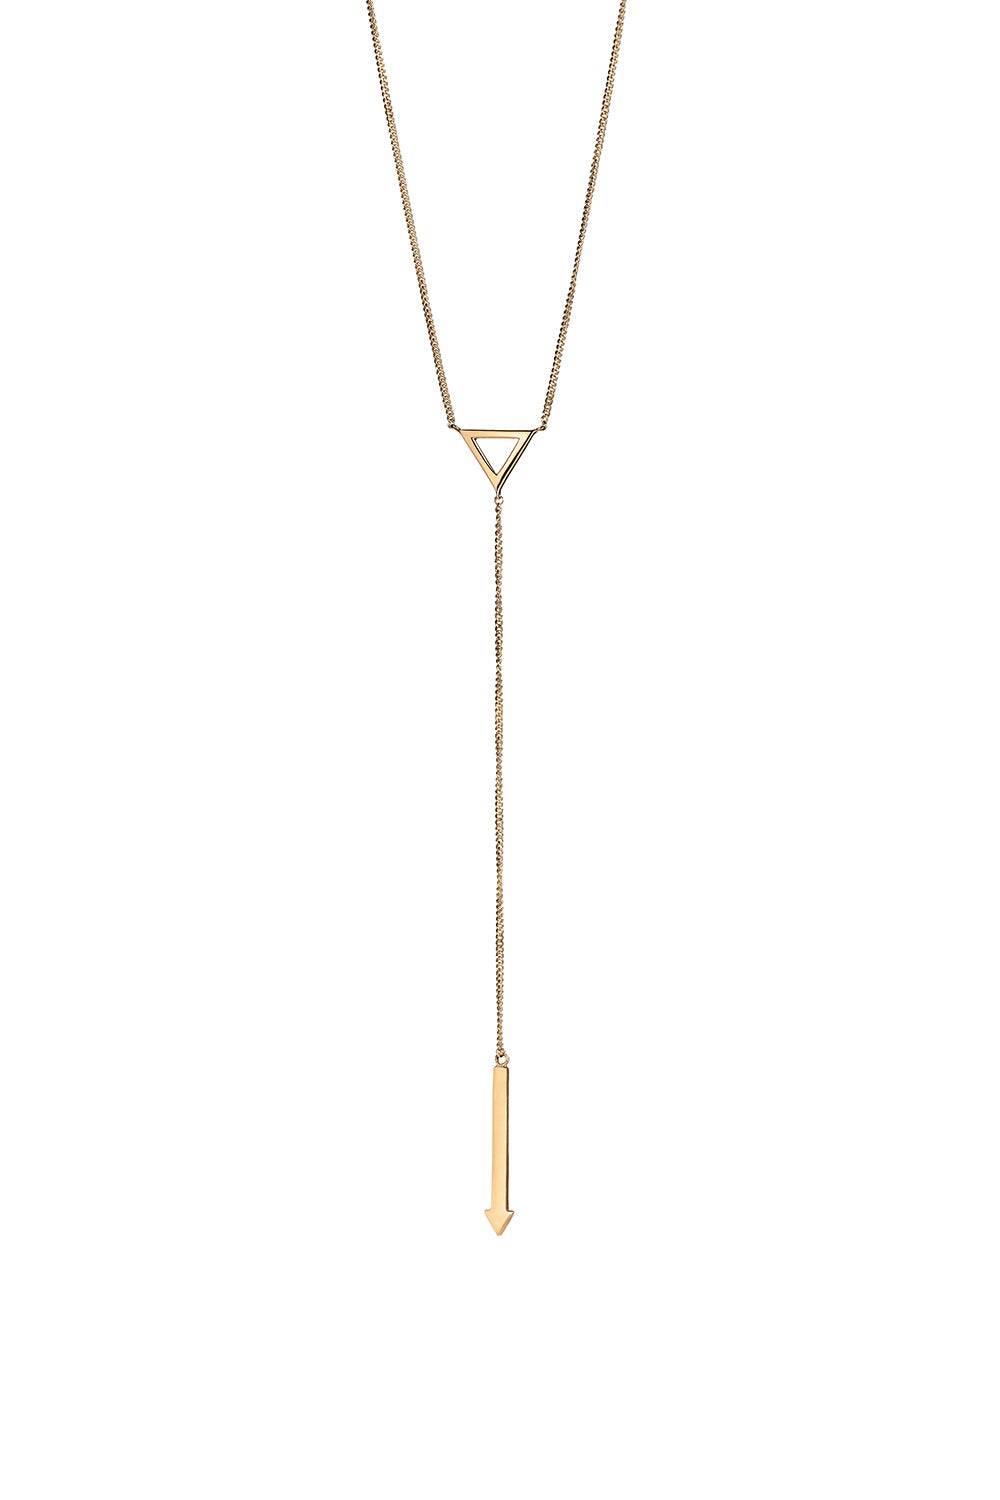 Metronome Necklace Gold